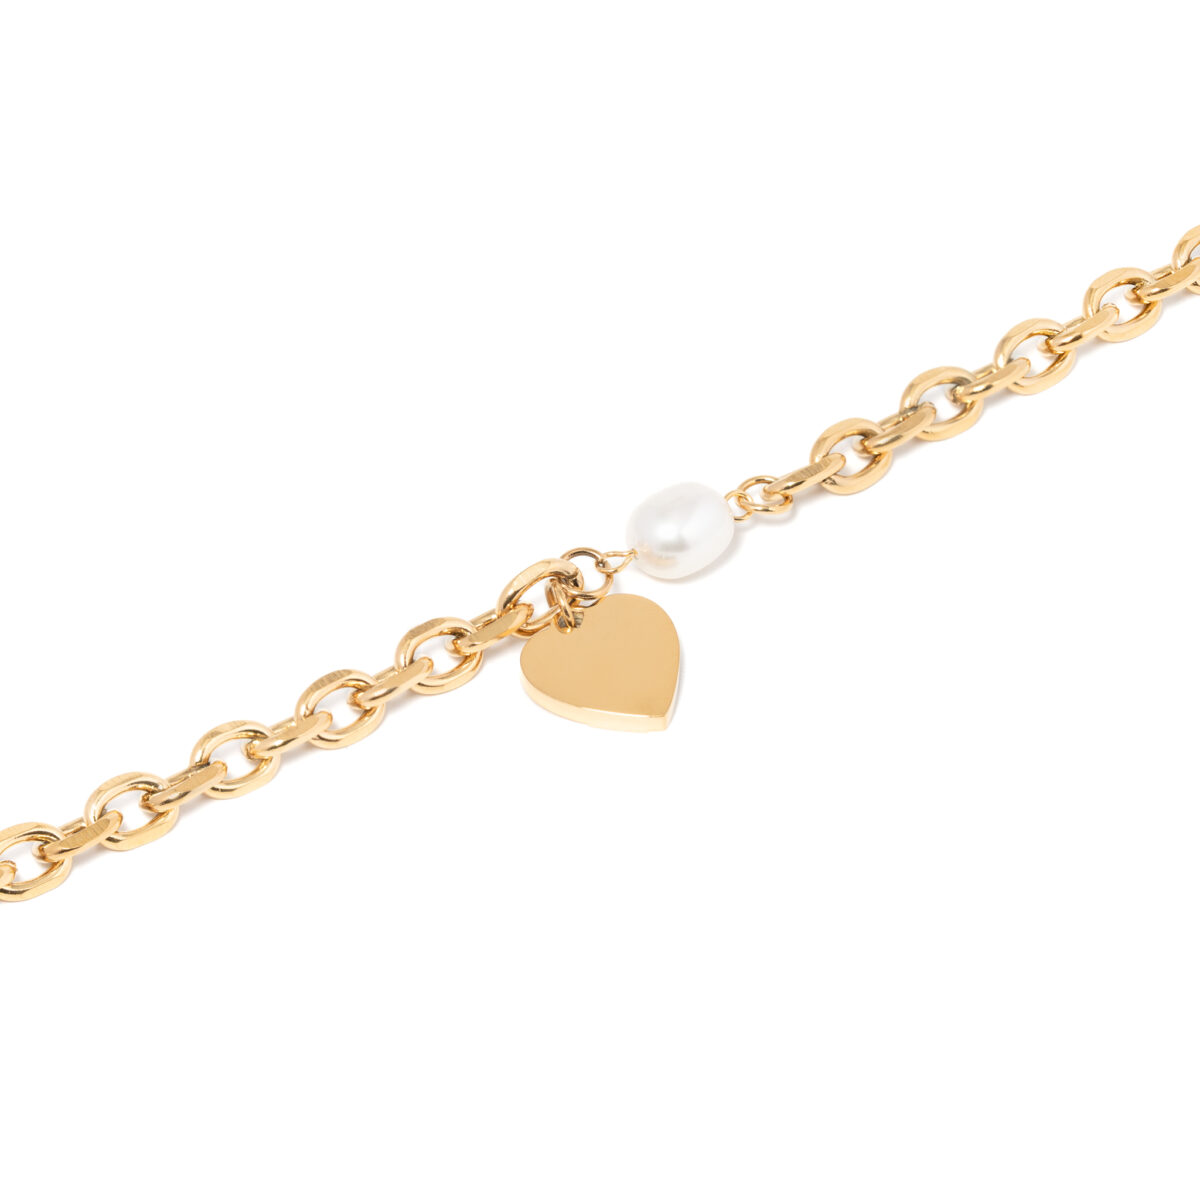 https://m.clubbella.co/product/agate-gold-heart-charm-bracelet/ Agate Gold Heart Charm Bracelet (1)